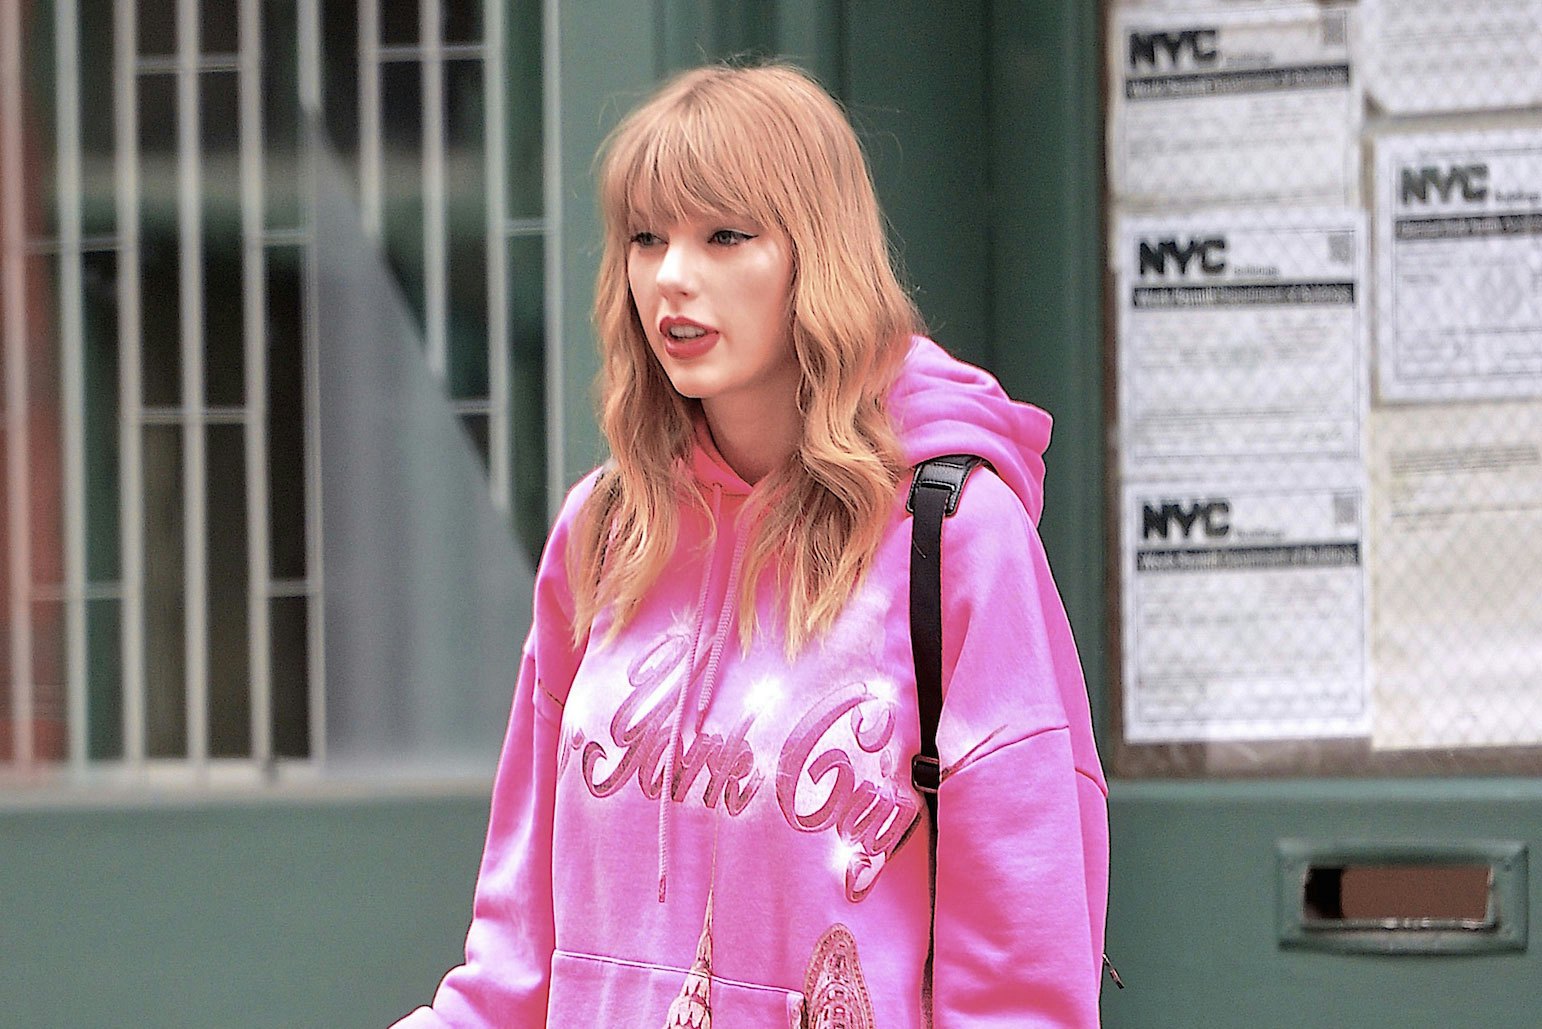 Taylor Swift Wore an $895 Sweatshirt to Prove Her Love for New York